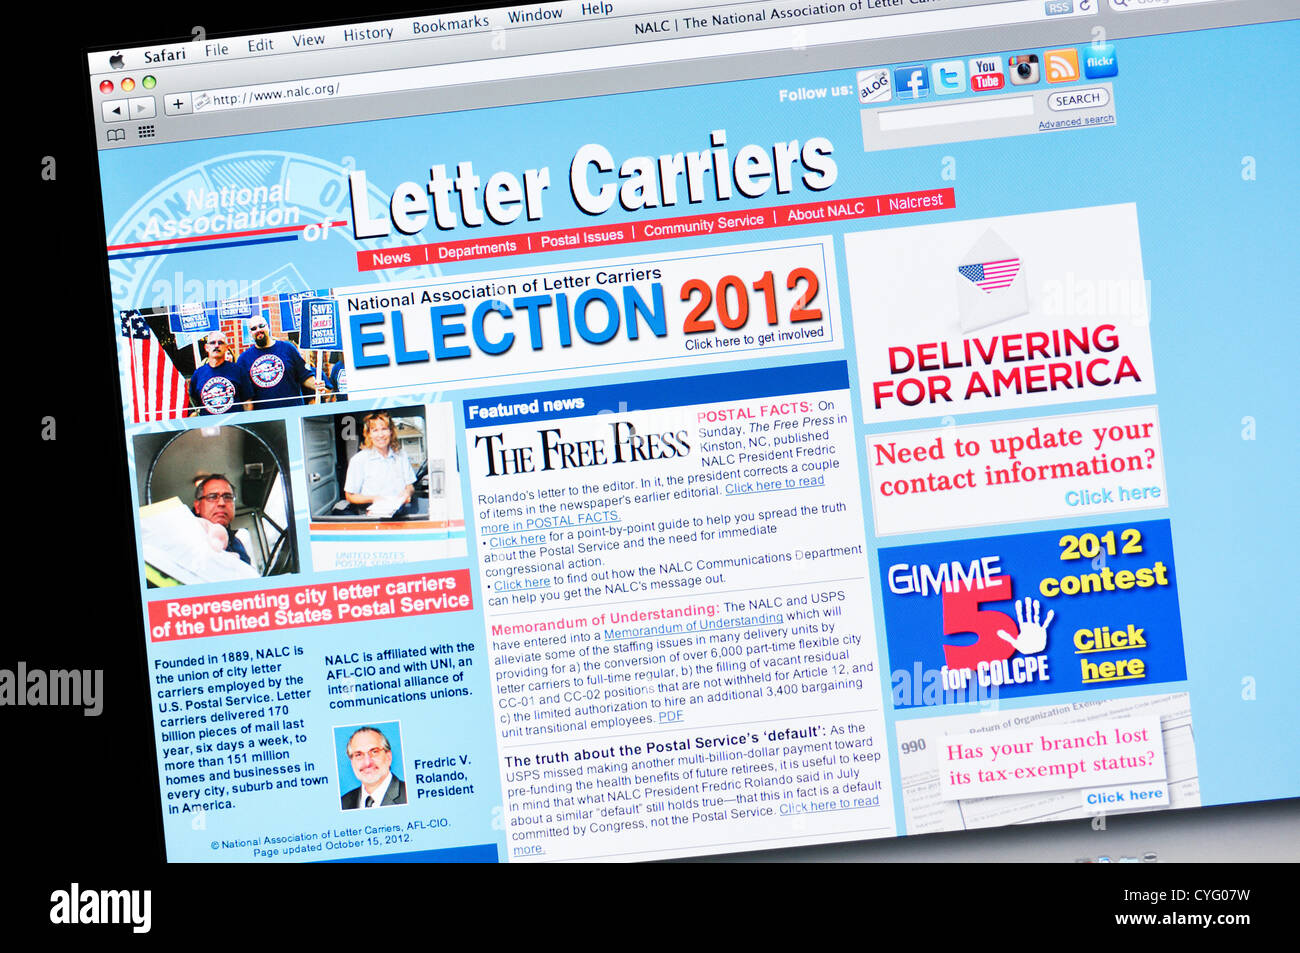 USA. 4th November, 2012. National Association of Letter Carriers - election 2012 Stock Photo